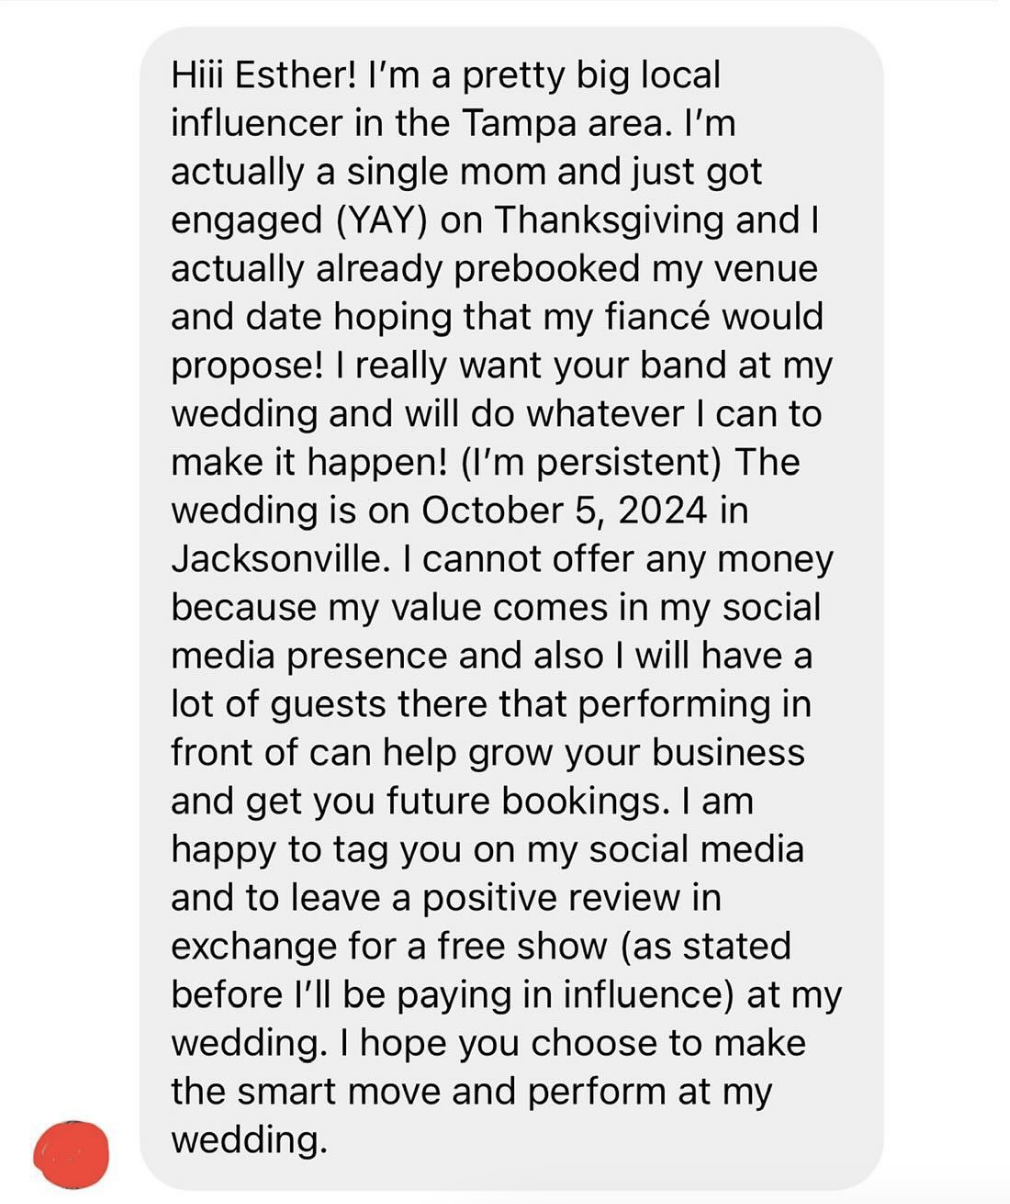 Message from a person excited about an engagement and discussing potential wedding plans and collaborations on October 5, 2024, in Jacksonville